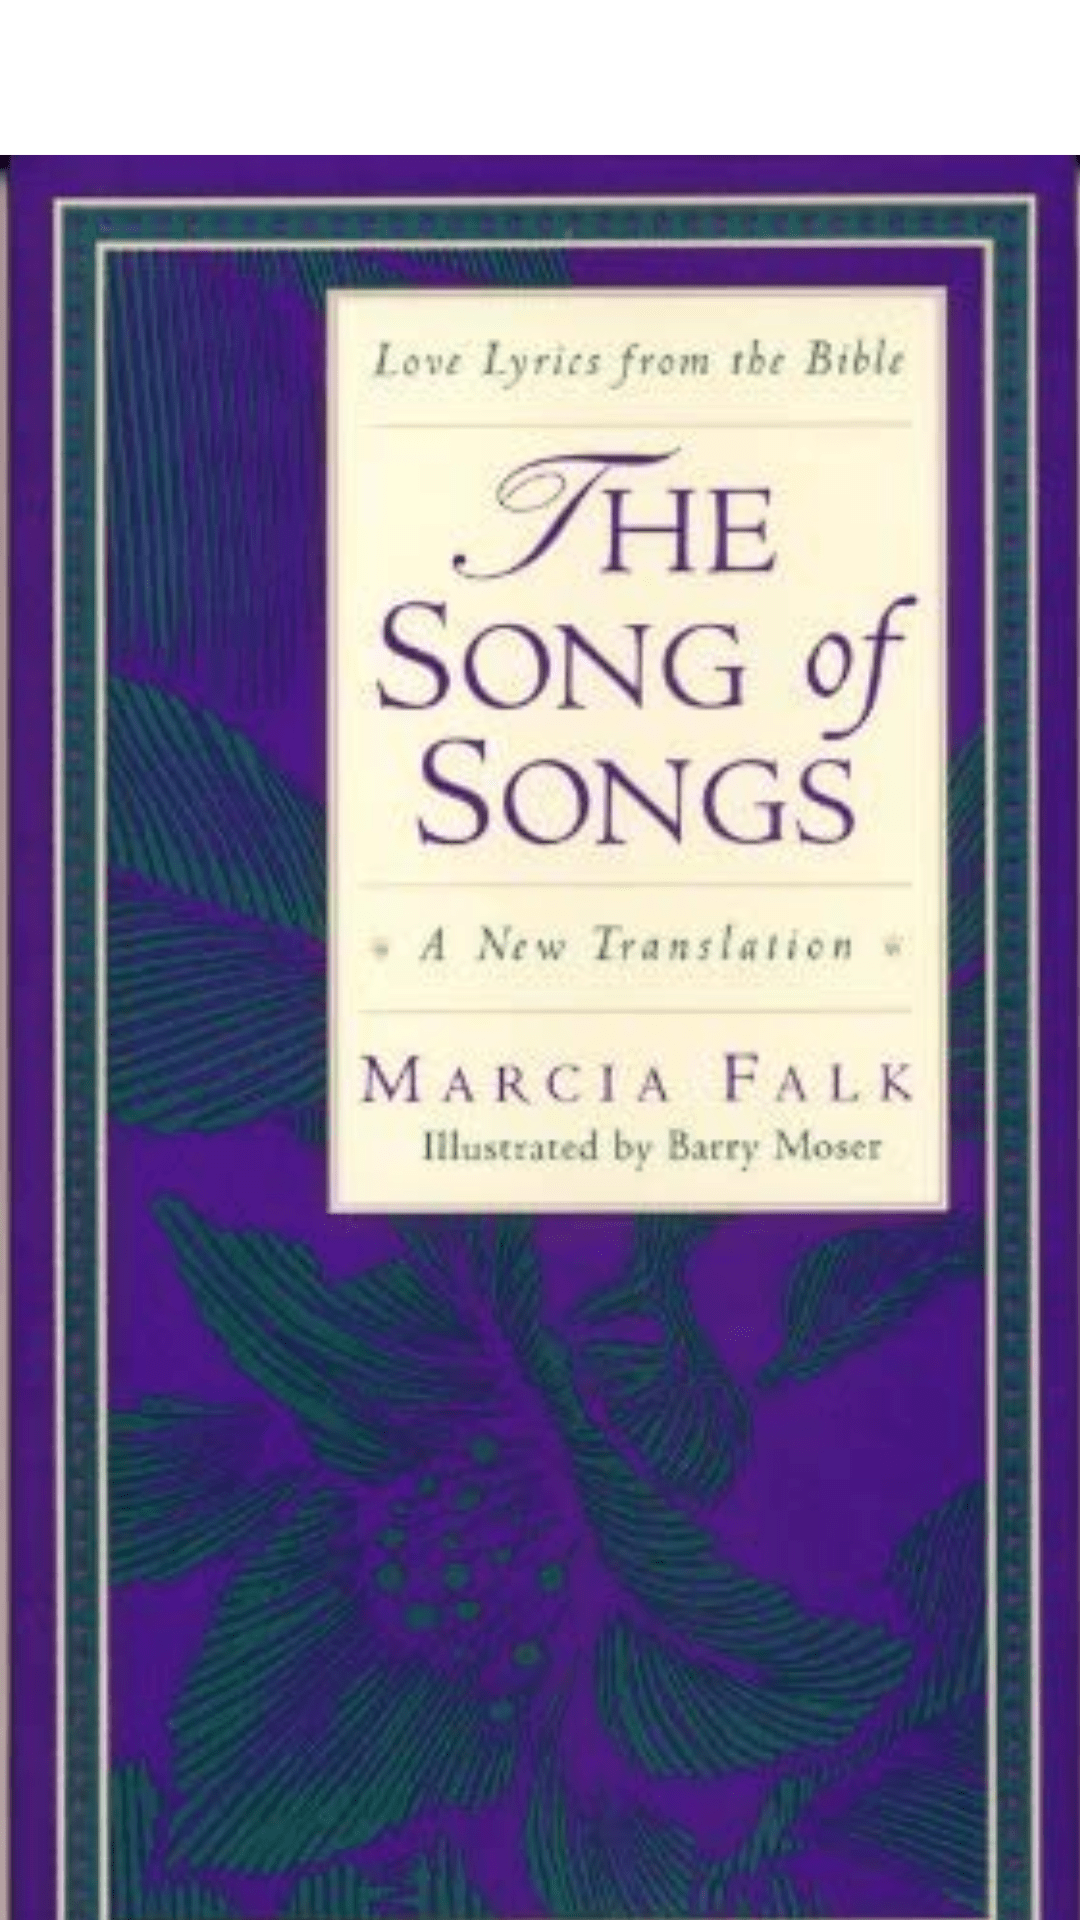 The Song of Songs : a New Translation : Love Lyrics from the Bible